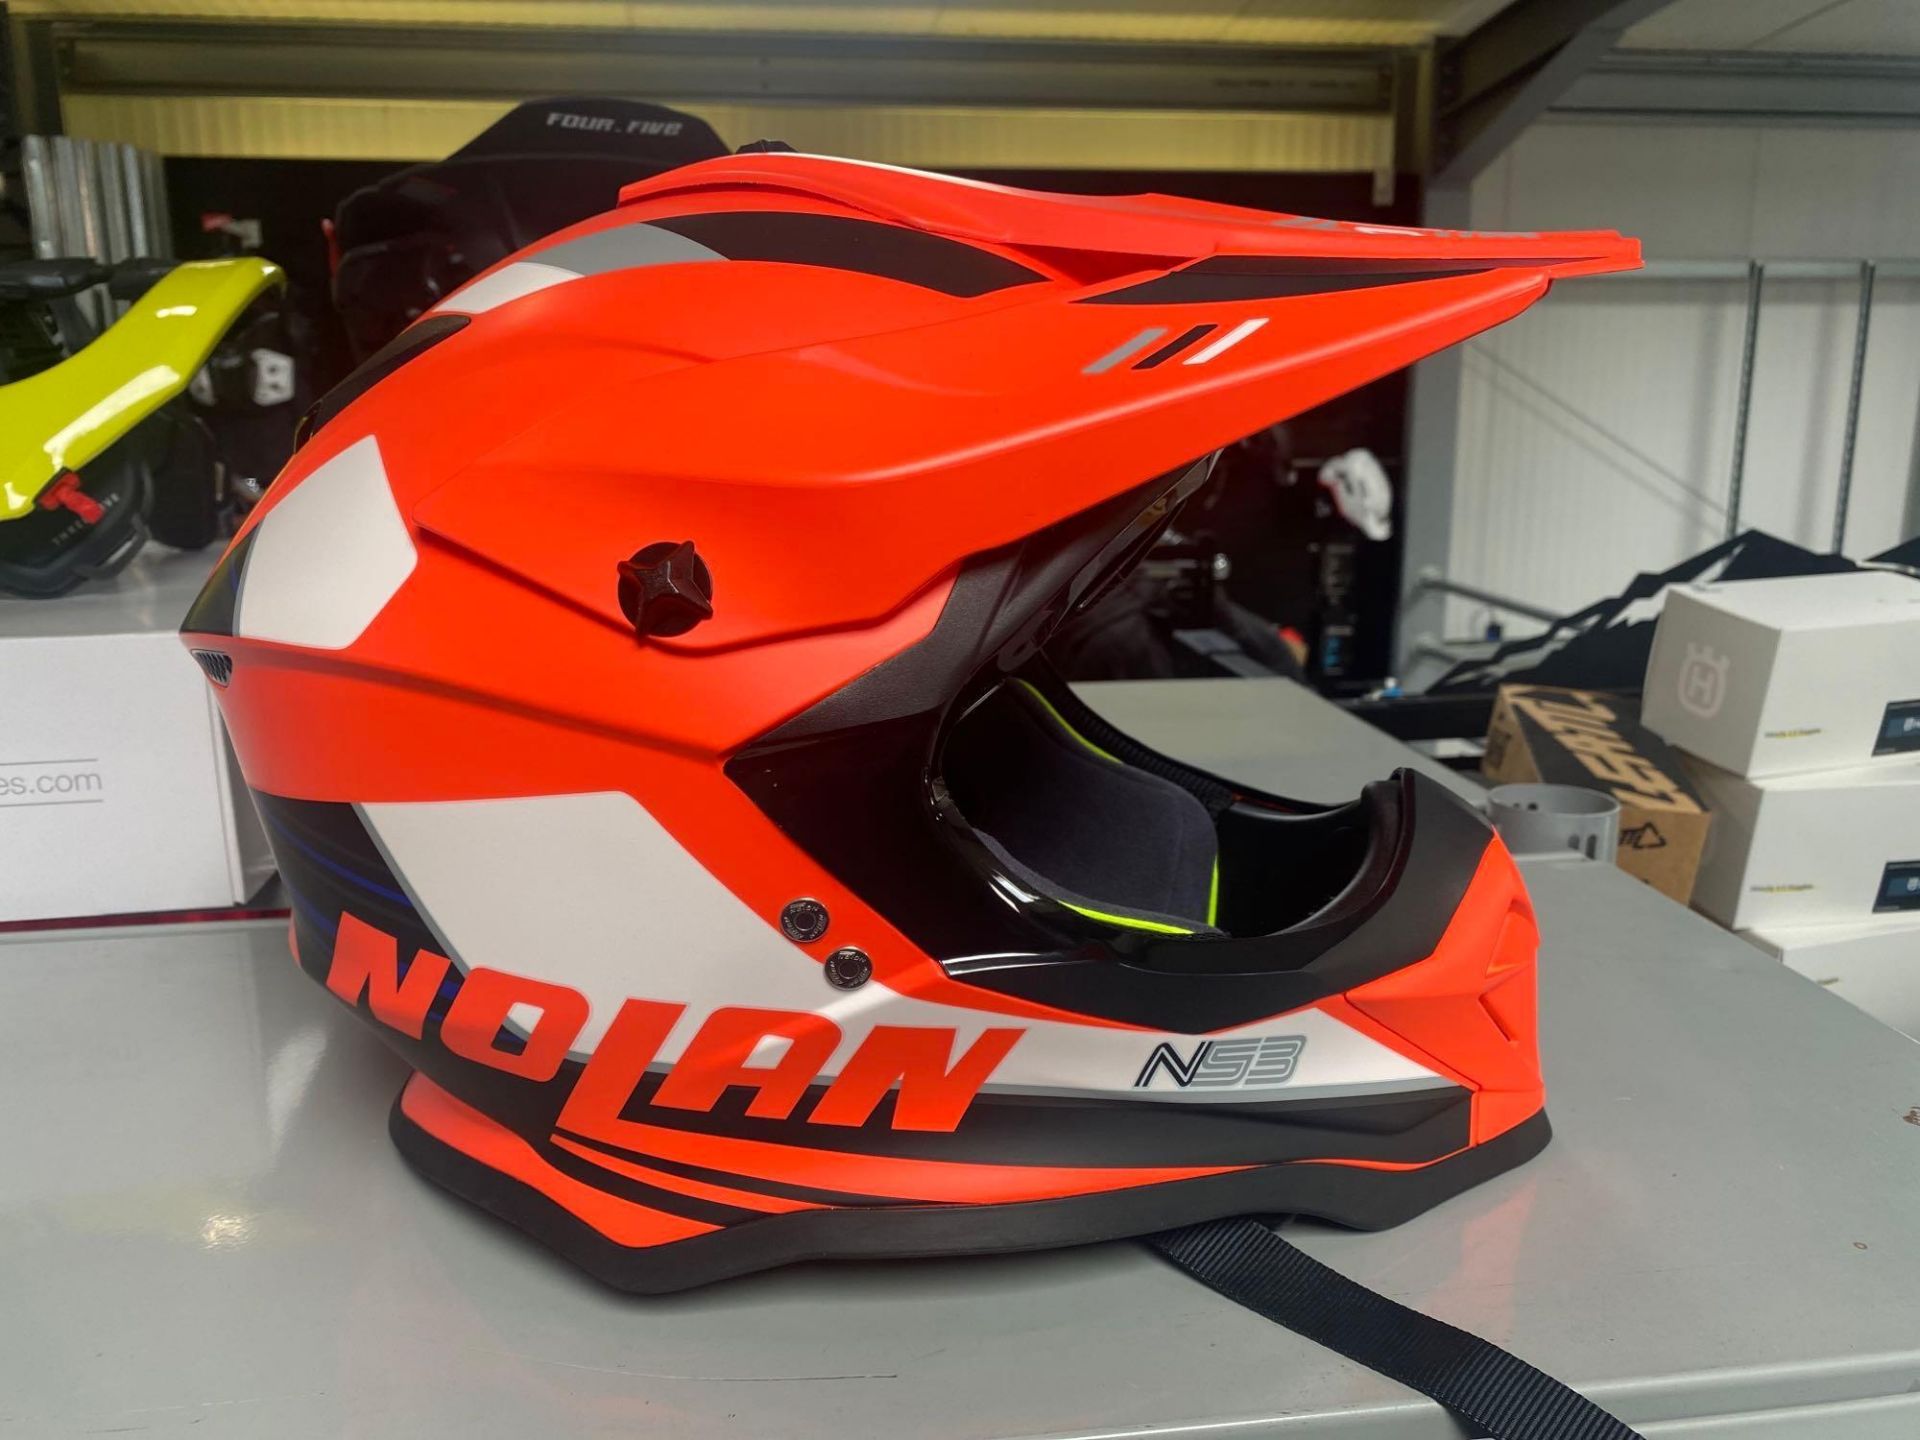 Nolan N53 motocross helmet size XXXL. Please note this lot will be sold as Zero Rated VAT